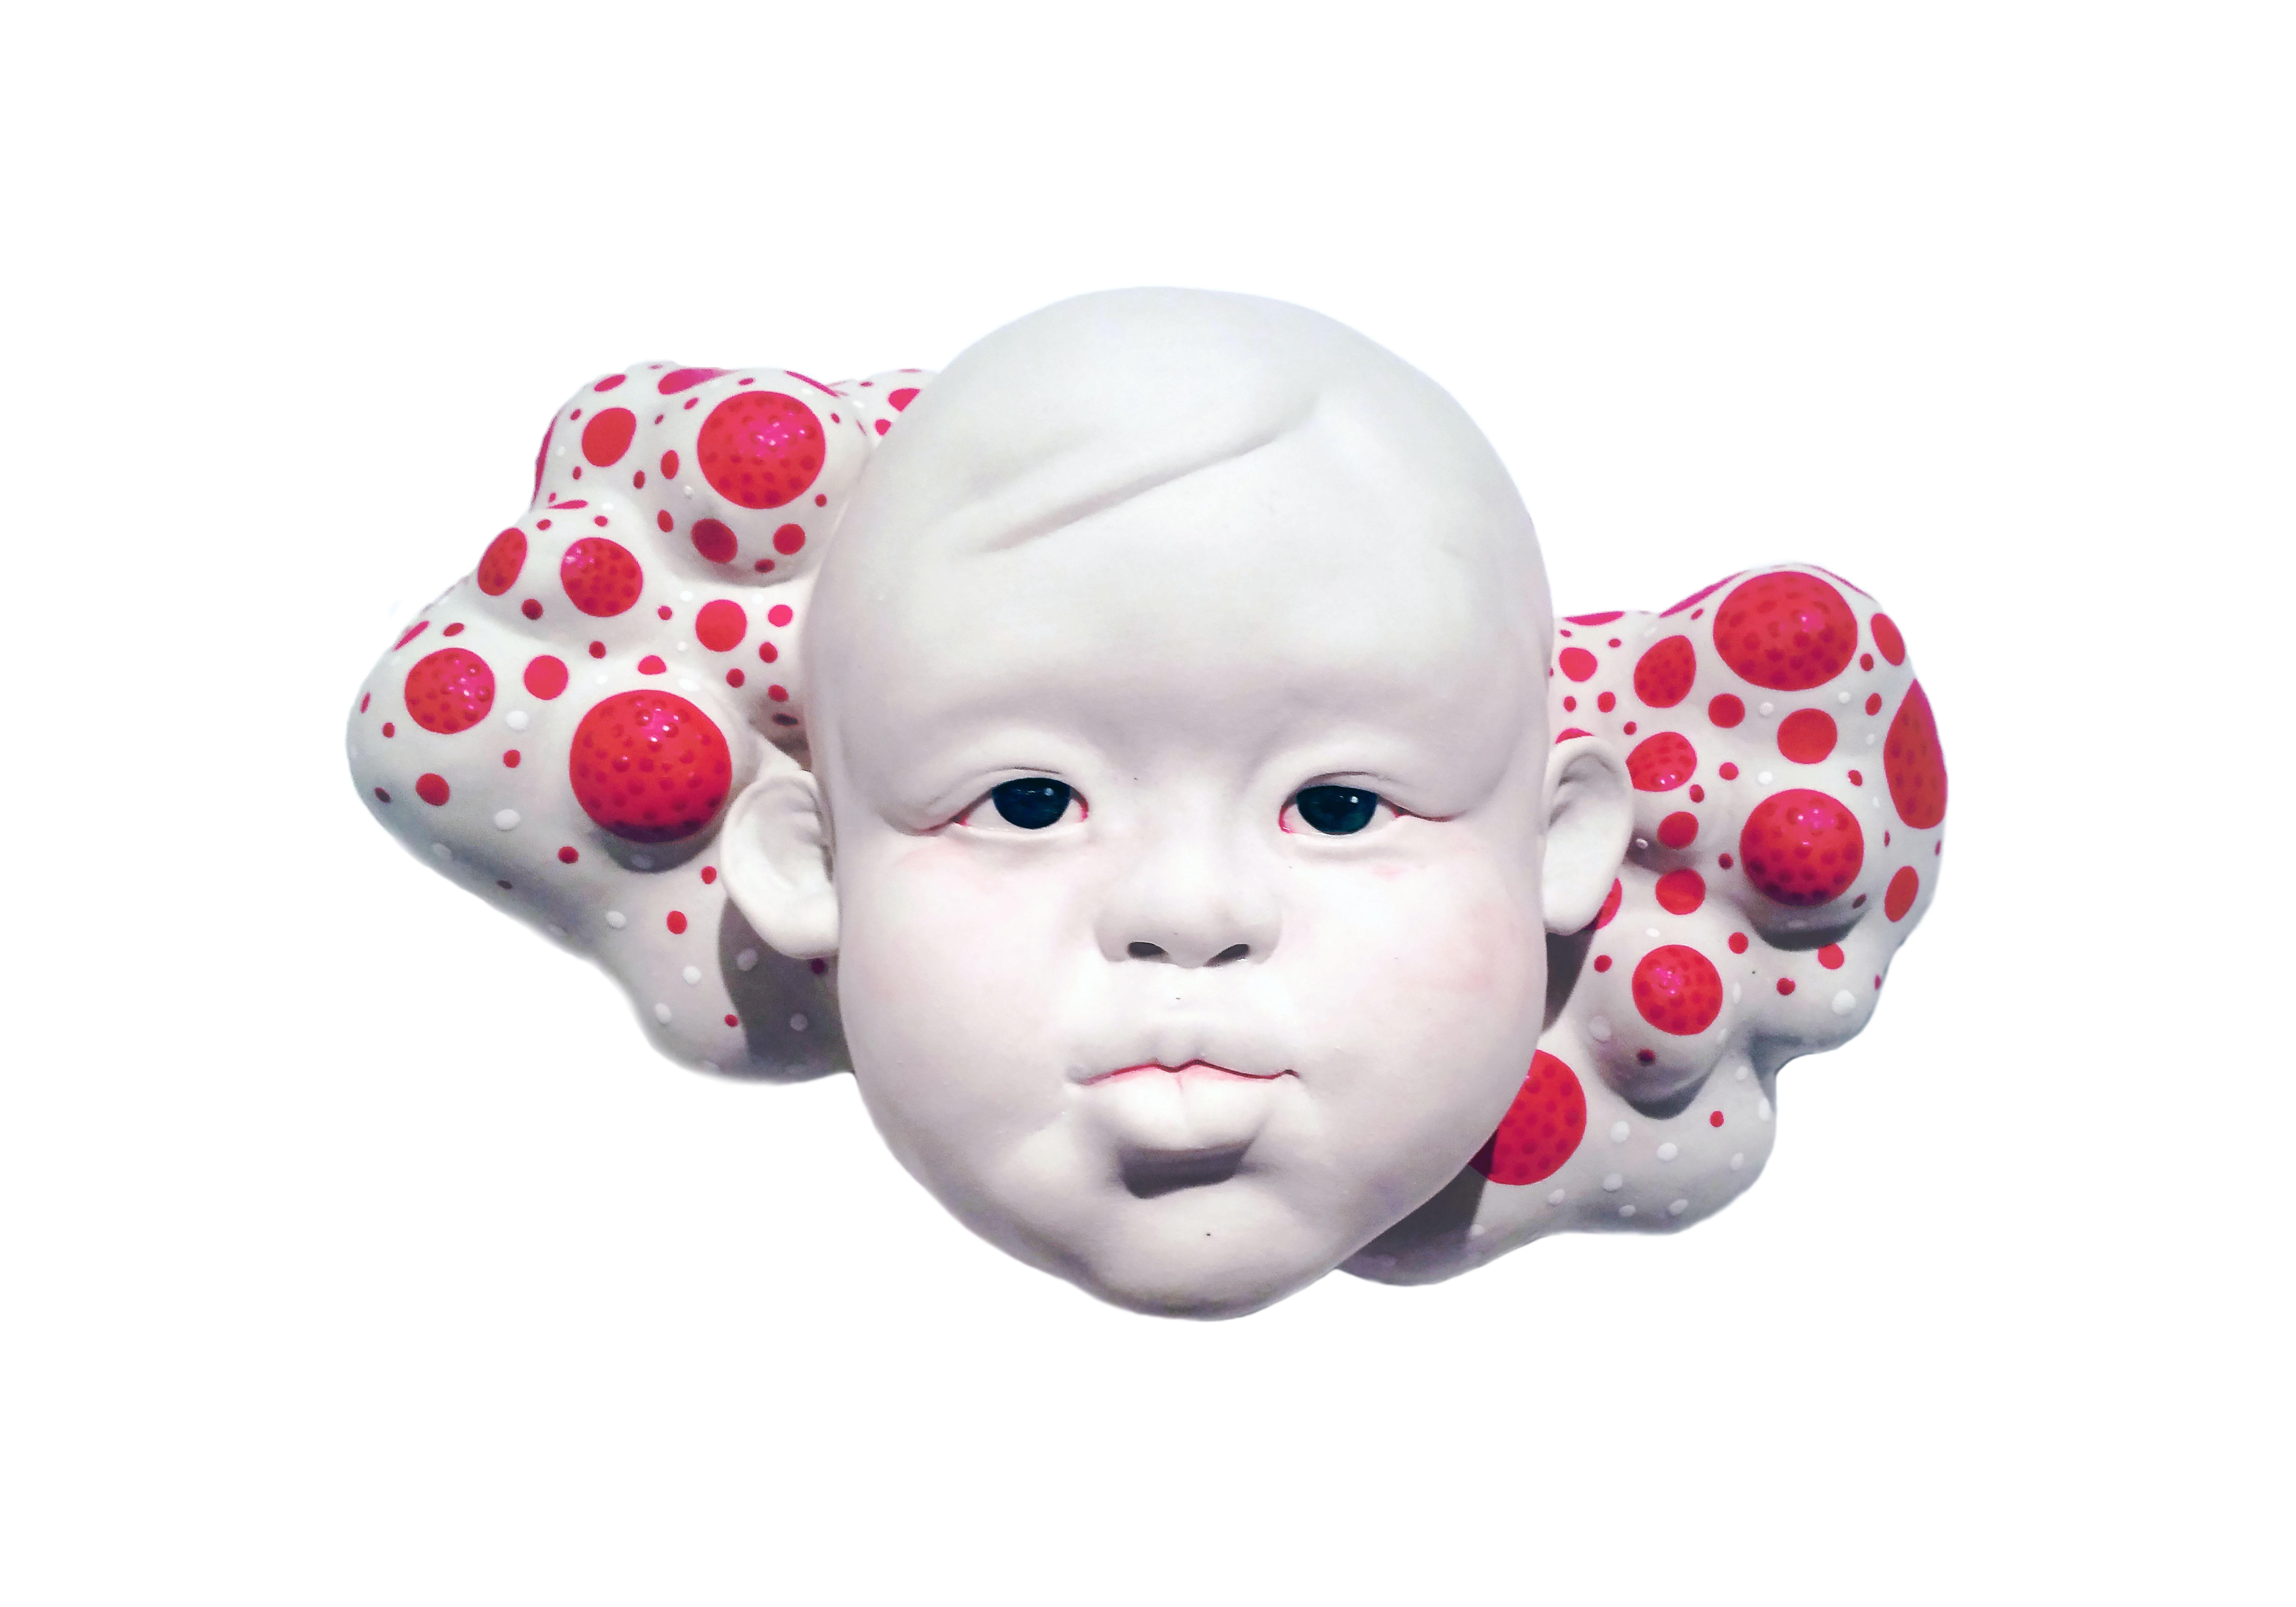 Kyungmin Park Figurative Sculpture - "My Red Moment", Contemporary Porcelain Ceramic Wall Mounting Sculpture 